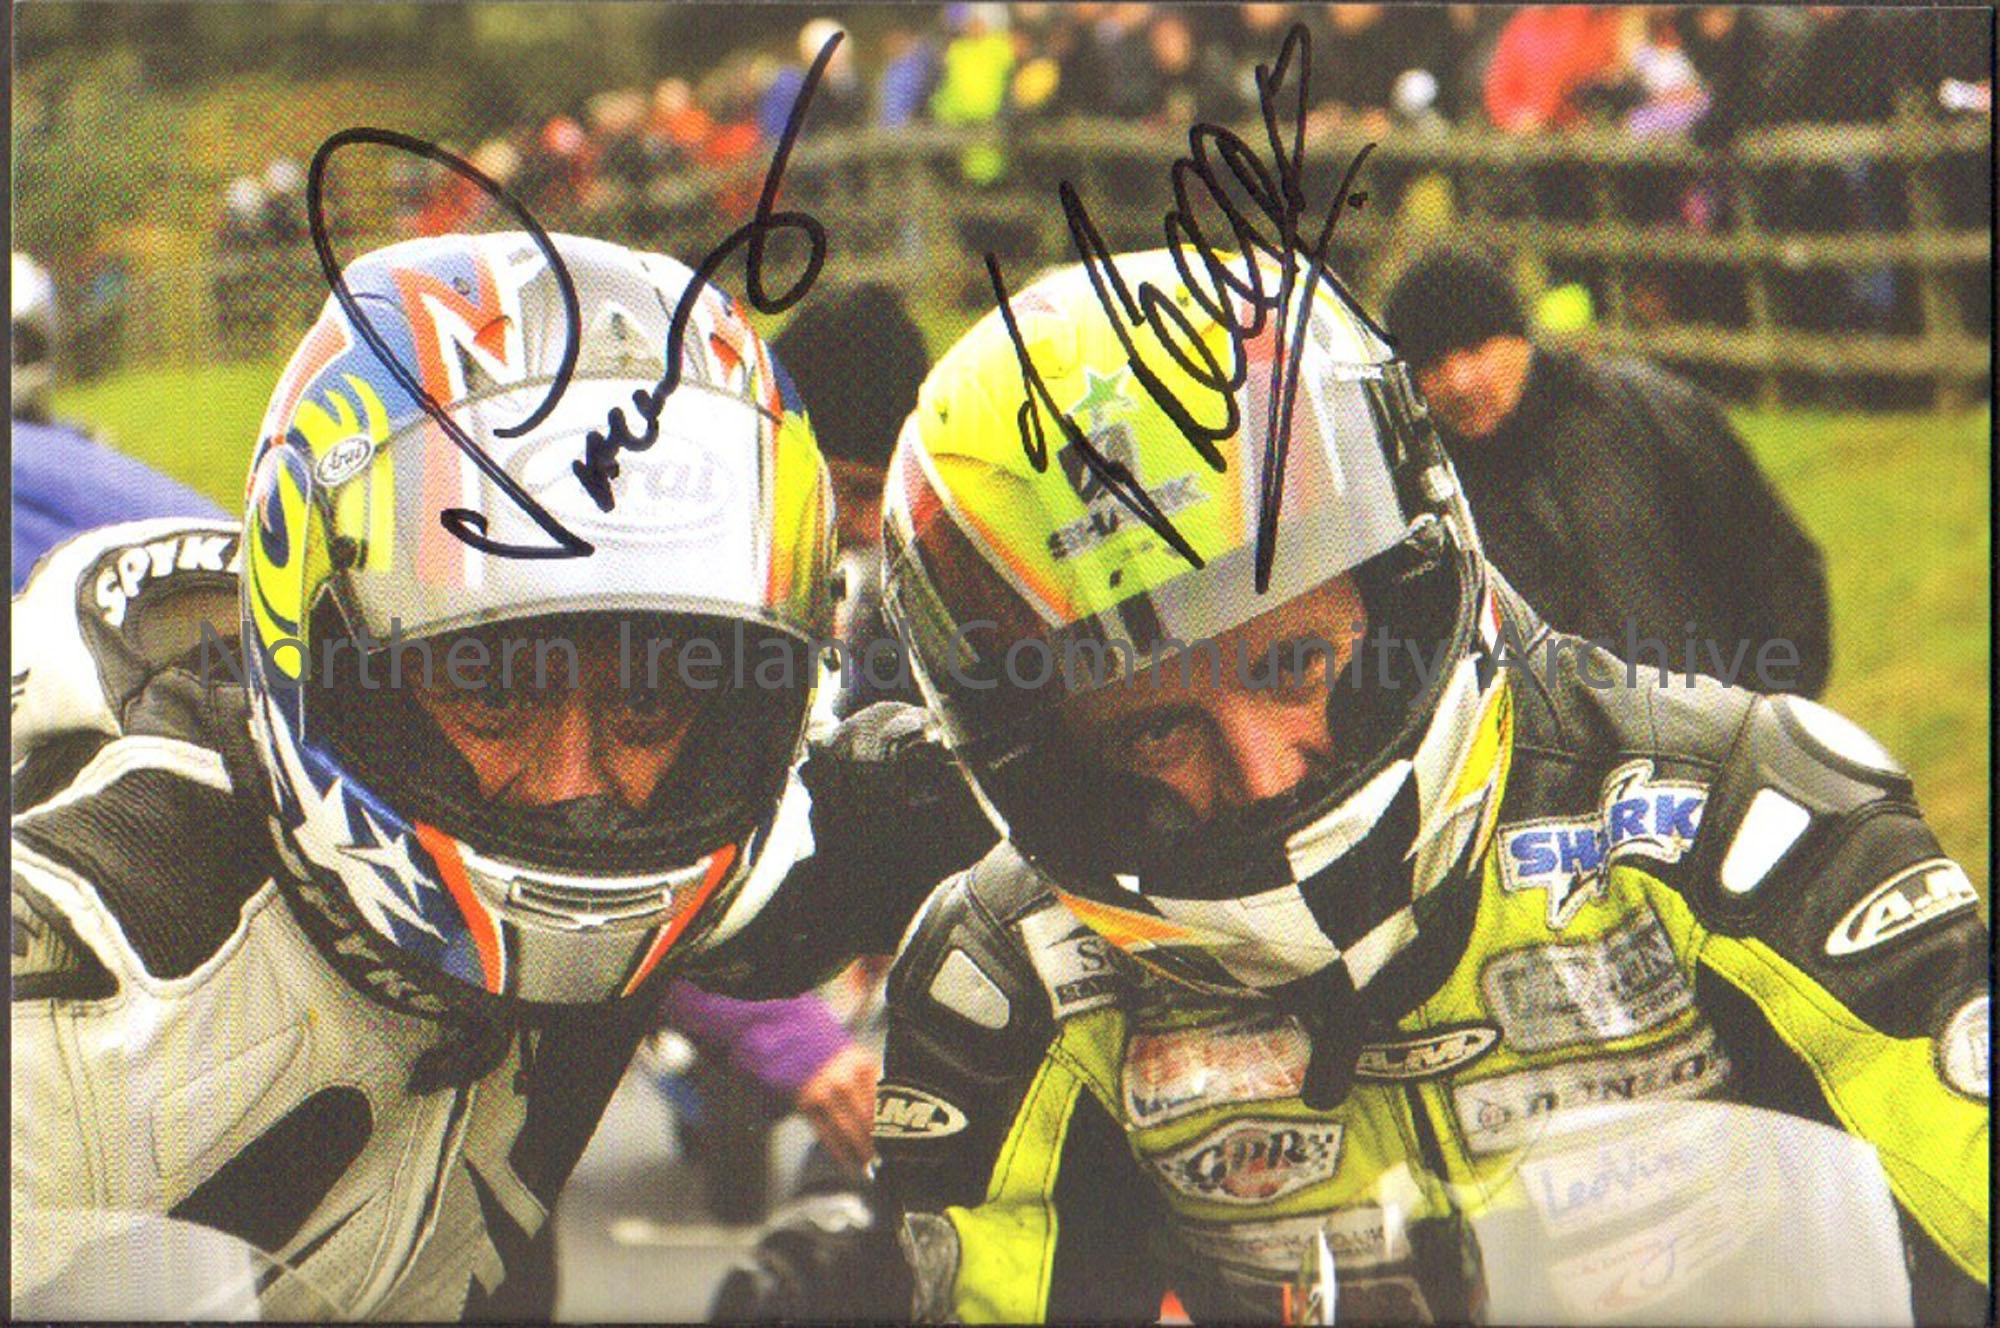 Signed photograph of Chris Palmer wearing white and black leathers with Ian Lougher wearing black and luminous green leathers. Both are wearing helmet…